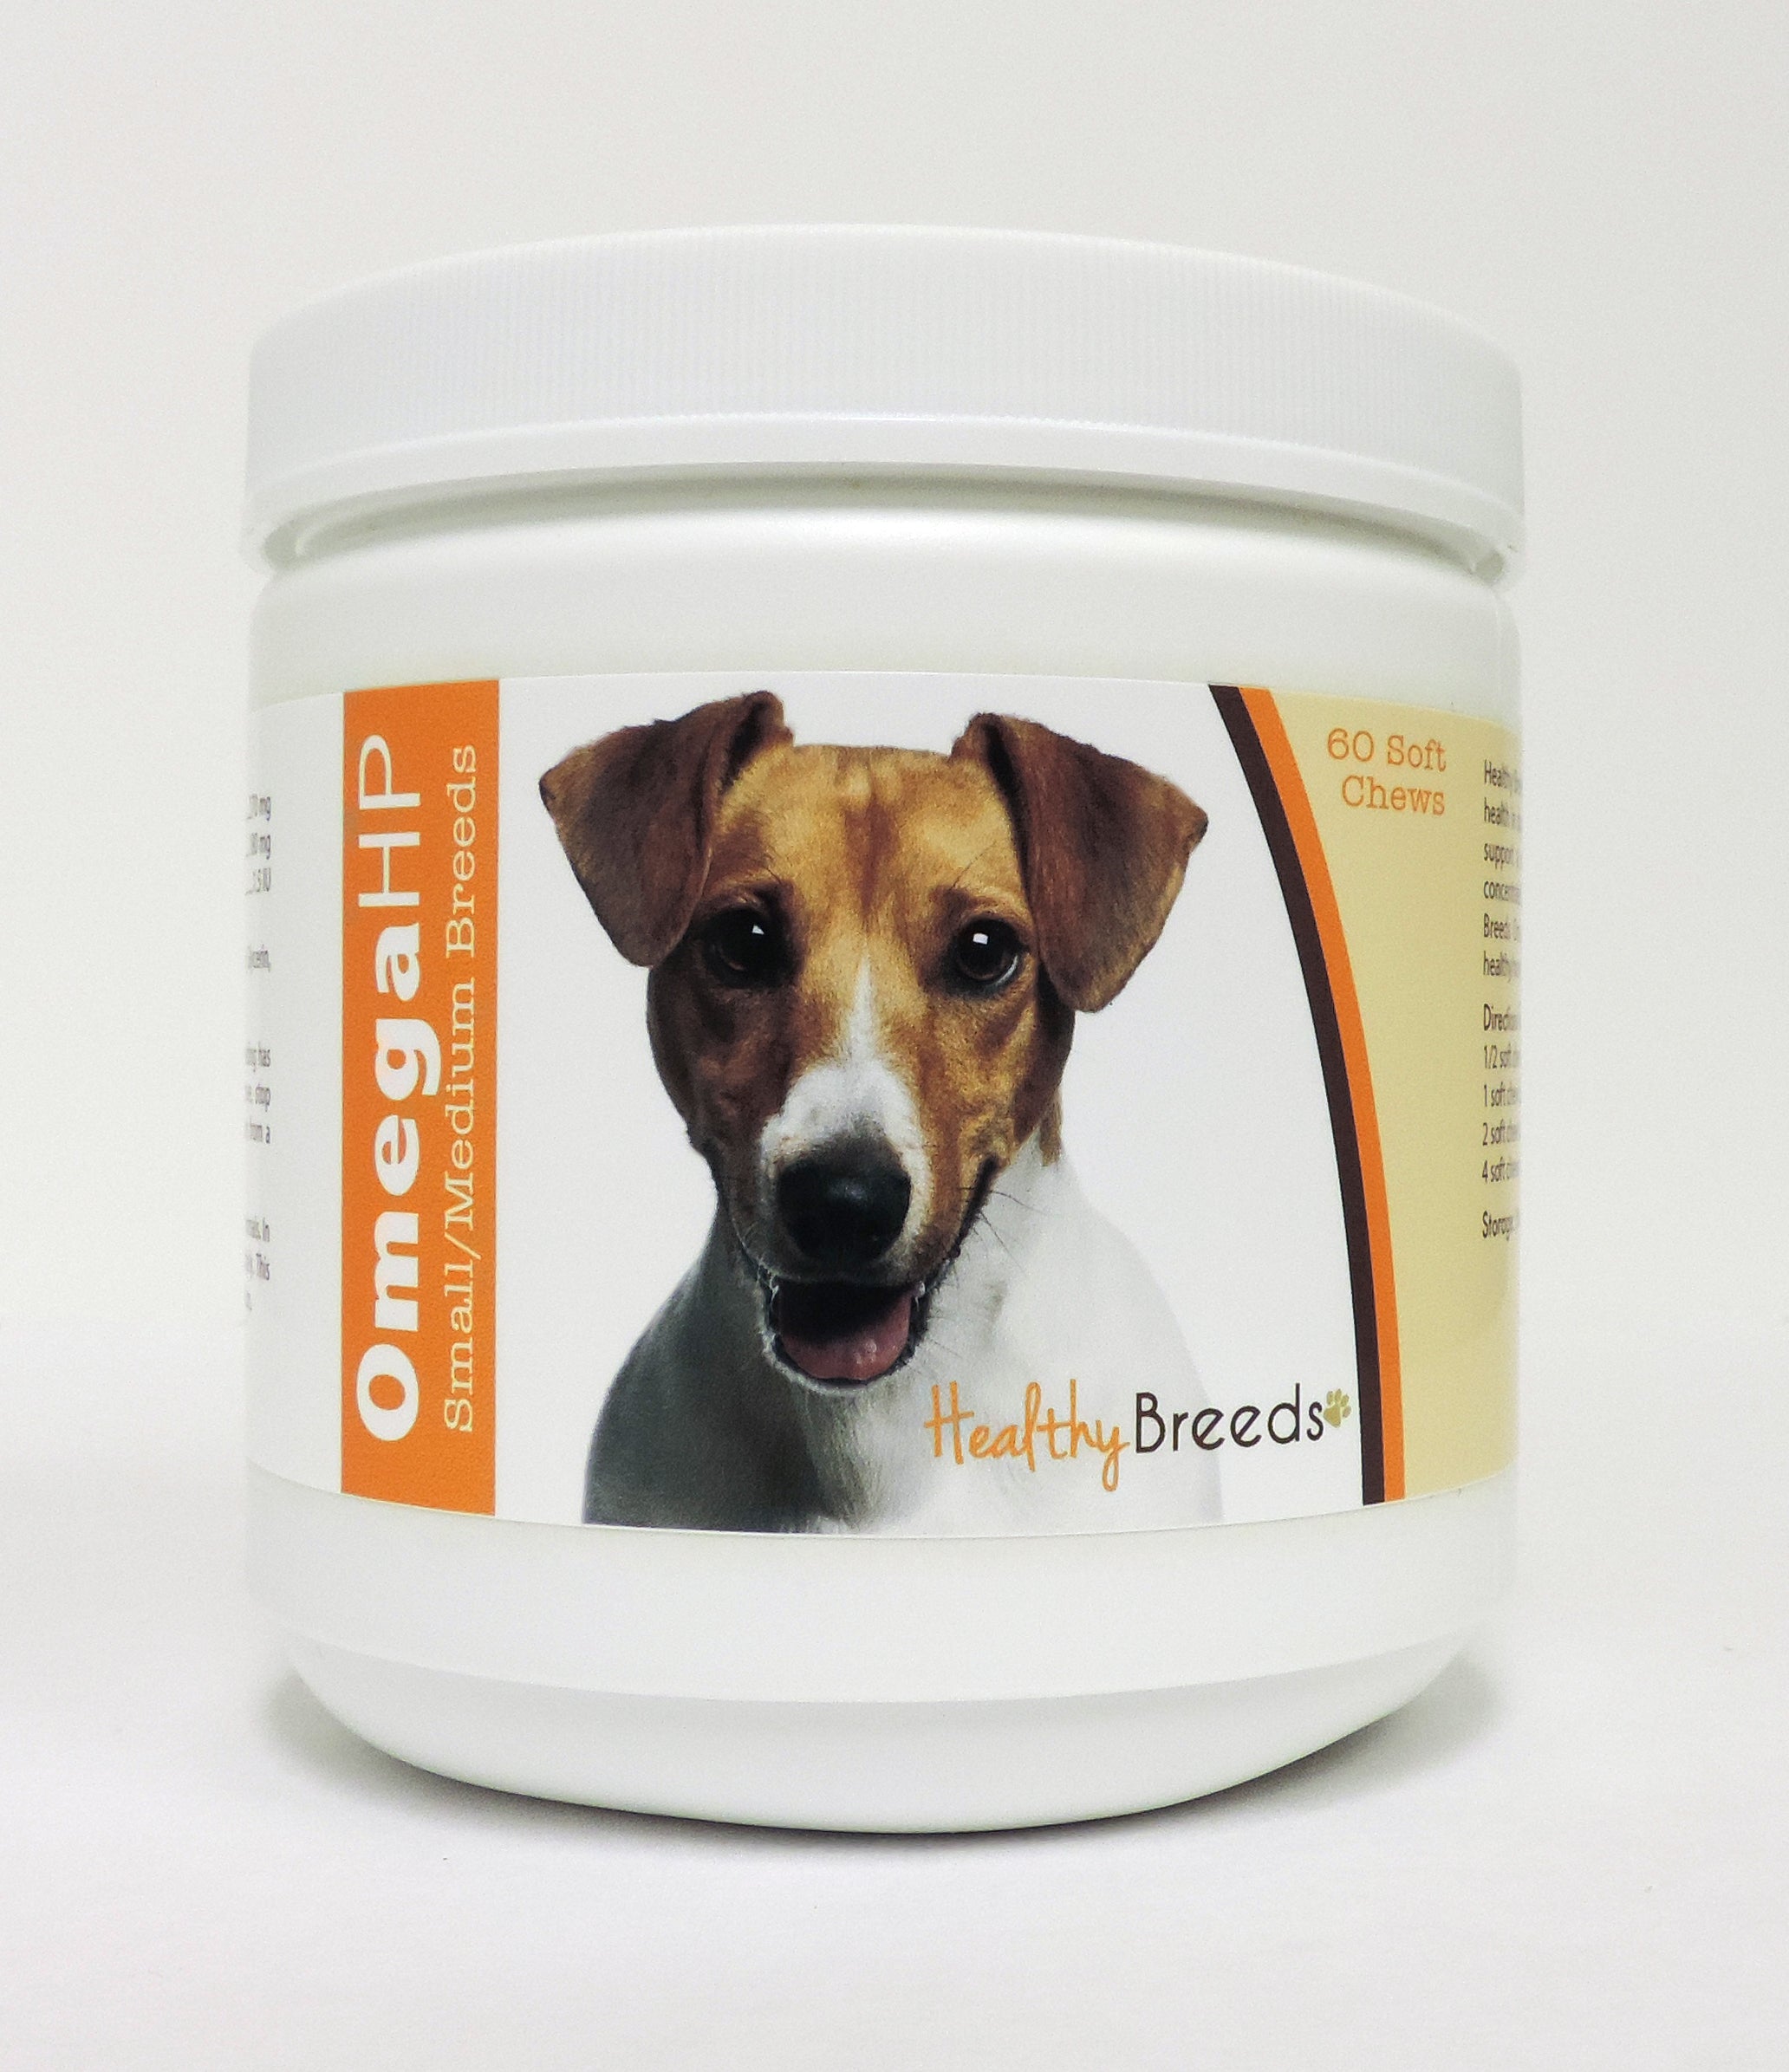 Jack Russell Terrier Omega HP Fatty Acid Skin and Coat Support Soft Chews 60 Count